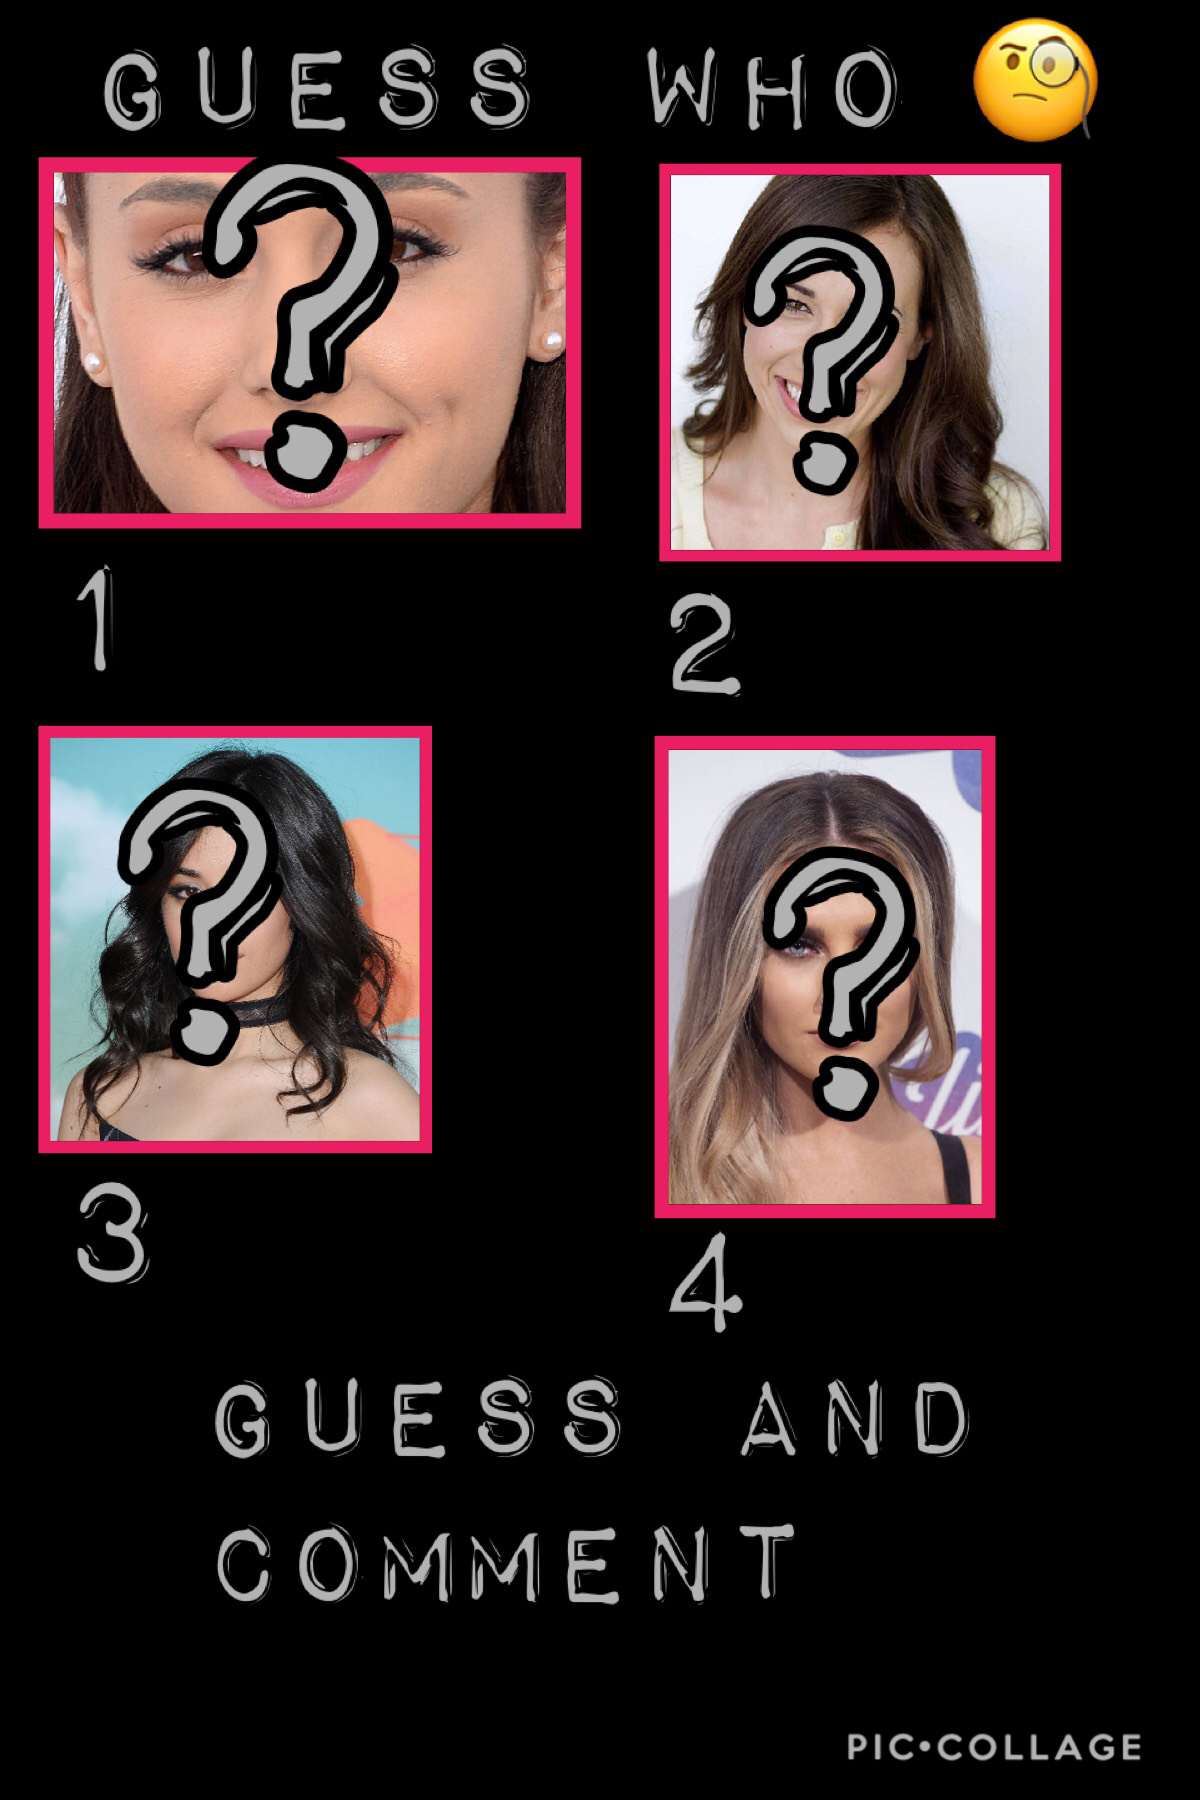 These area few of my fave celebrities guess and leave a comment 🤩